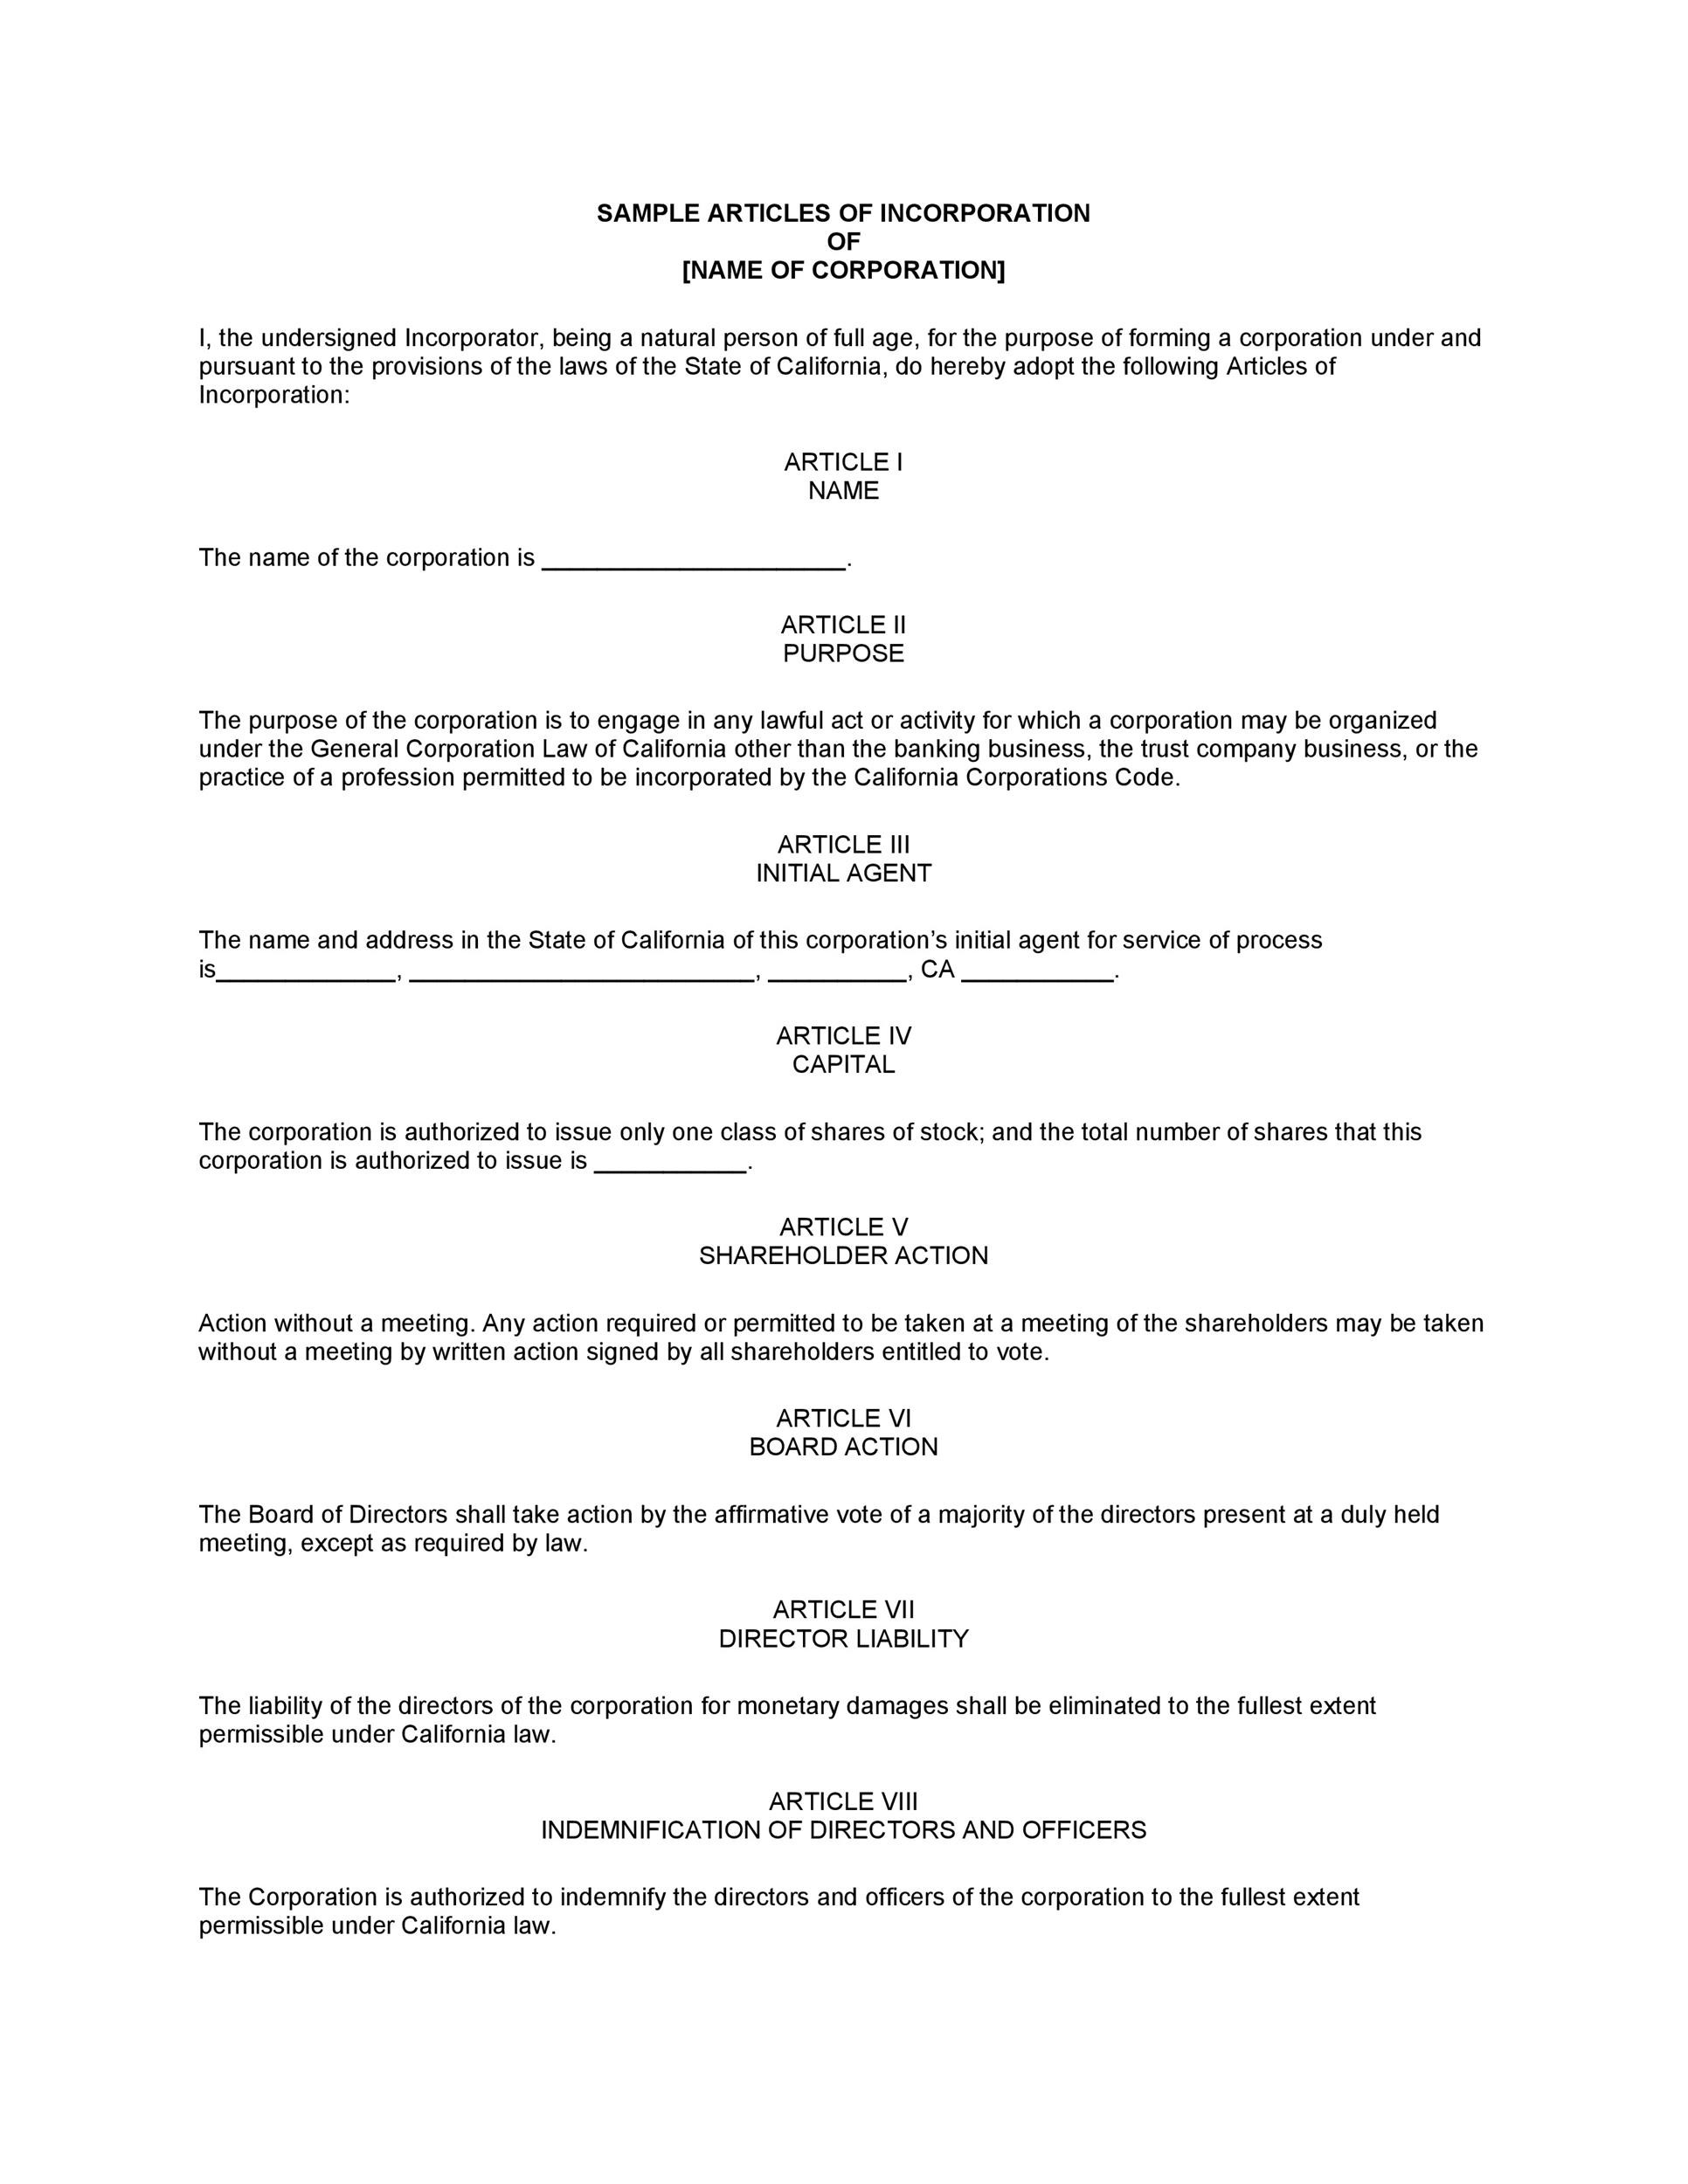 Articles Of Incorporation 47 Templates For Any State TemplateLab